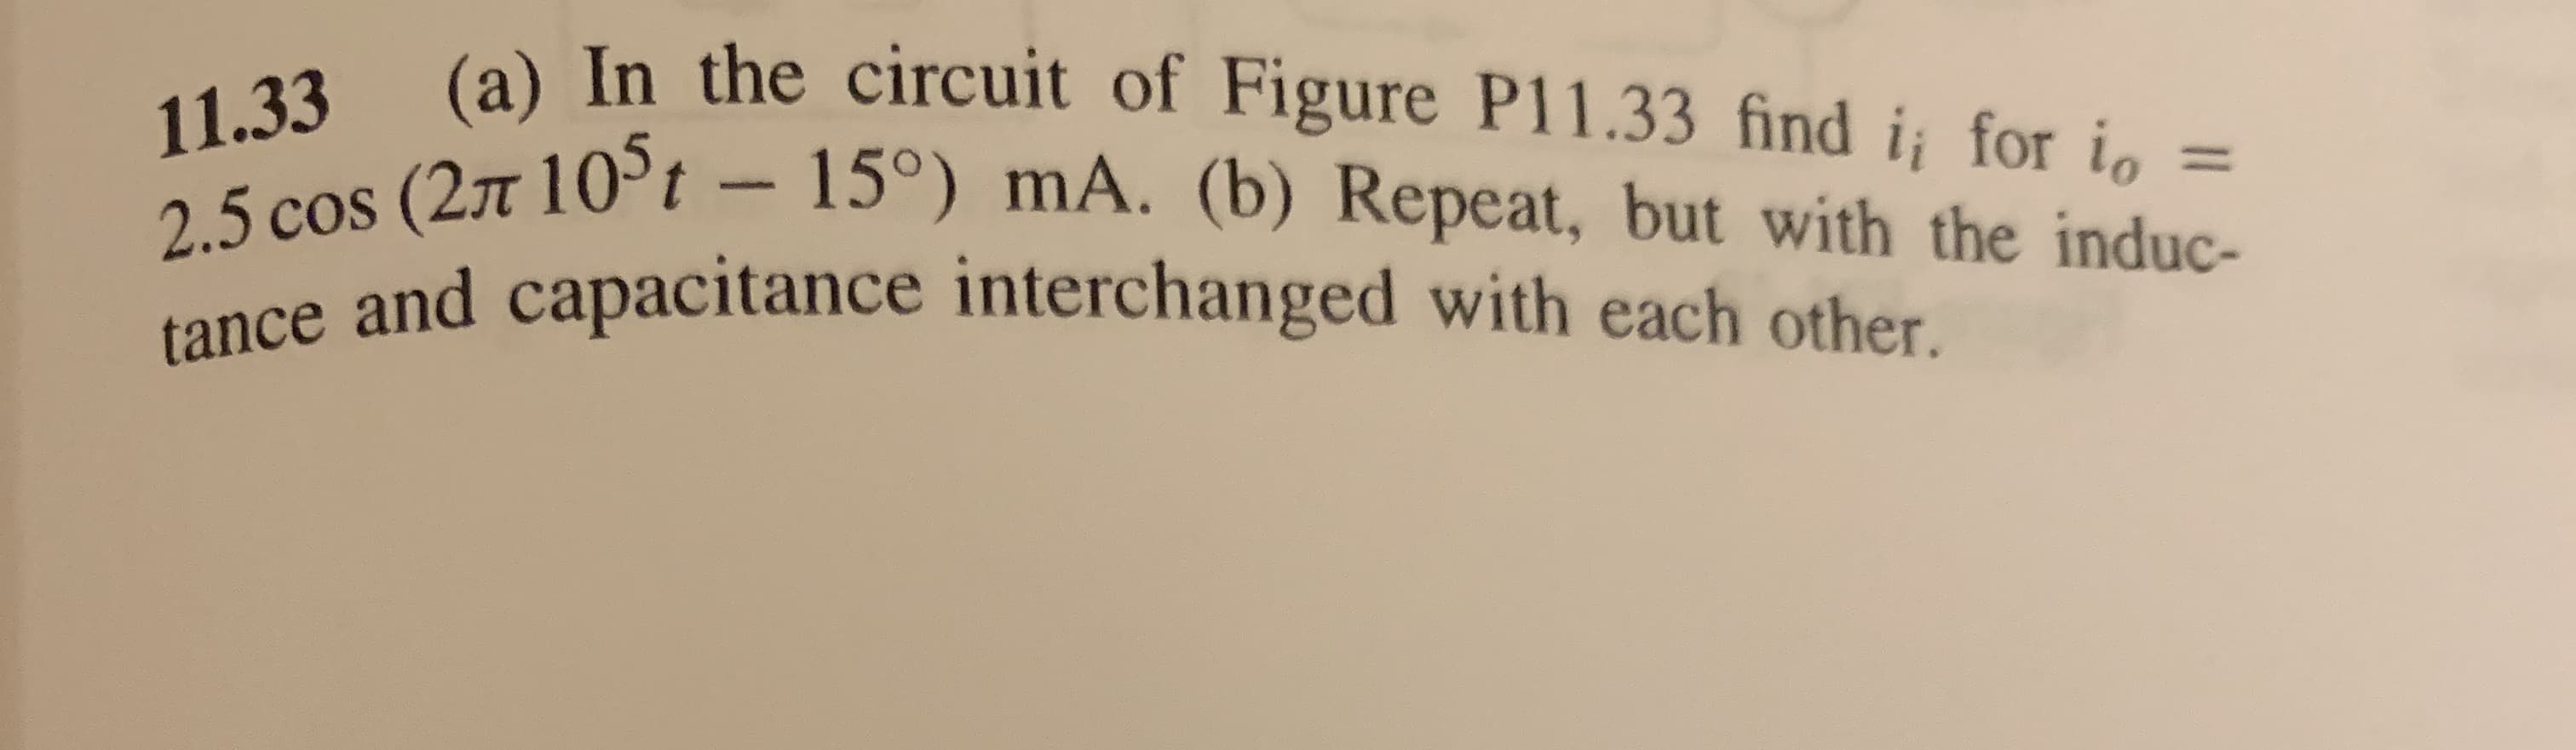 (a) In the circuit of Figure P11.33 find i for i=
11.33
2.5 cos (27t 105t - 15°) mA. (b) Repeat, but with the induc-
tance and capacitance interchanged with each other.
